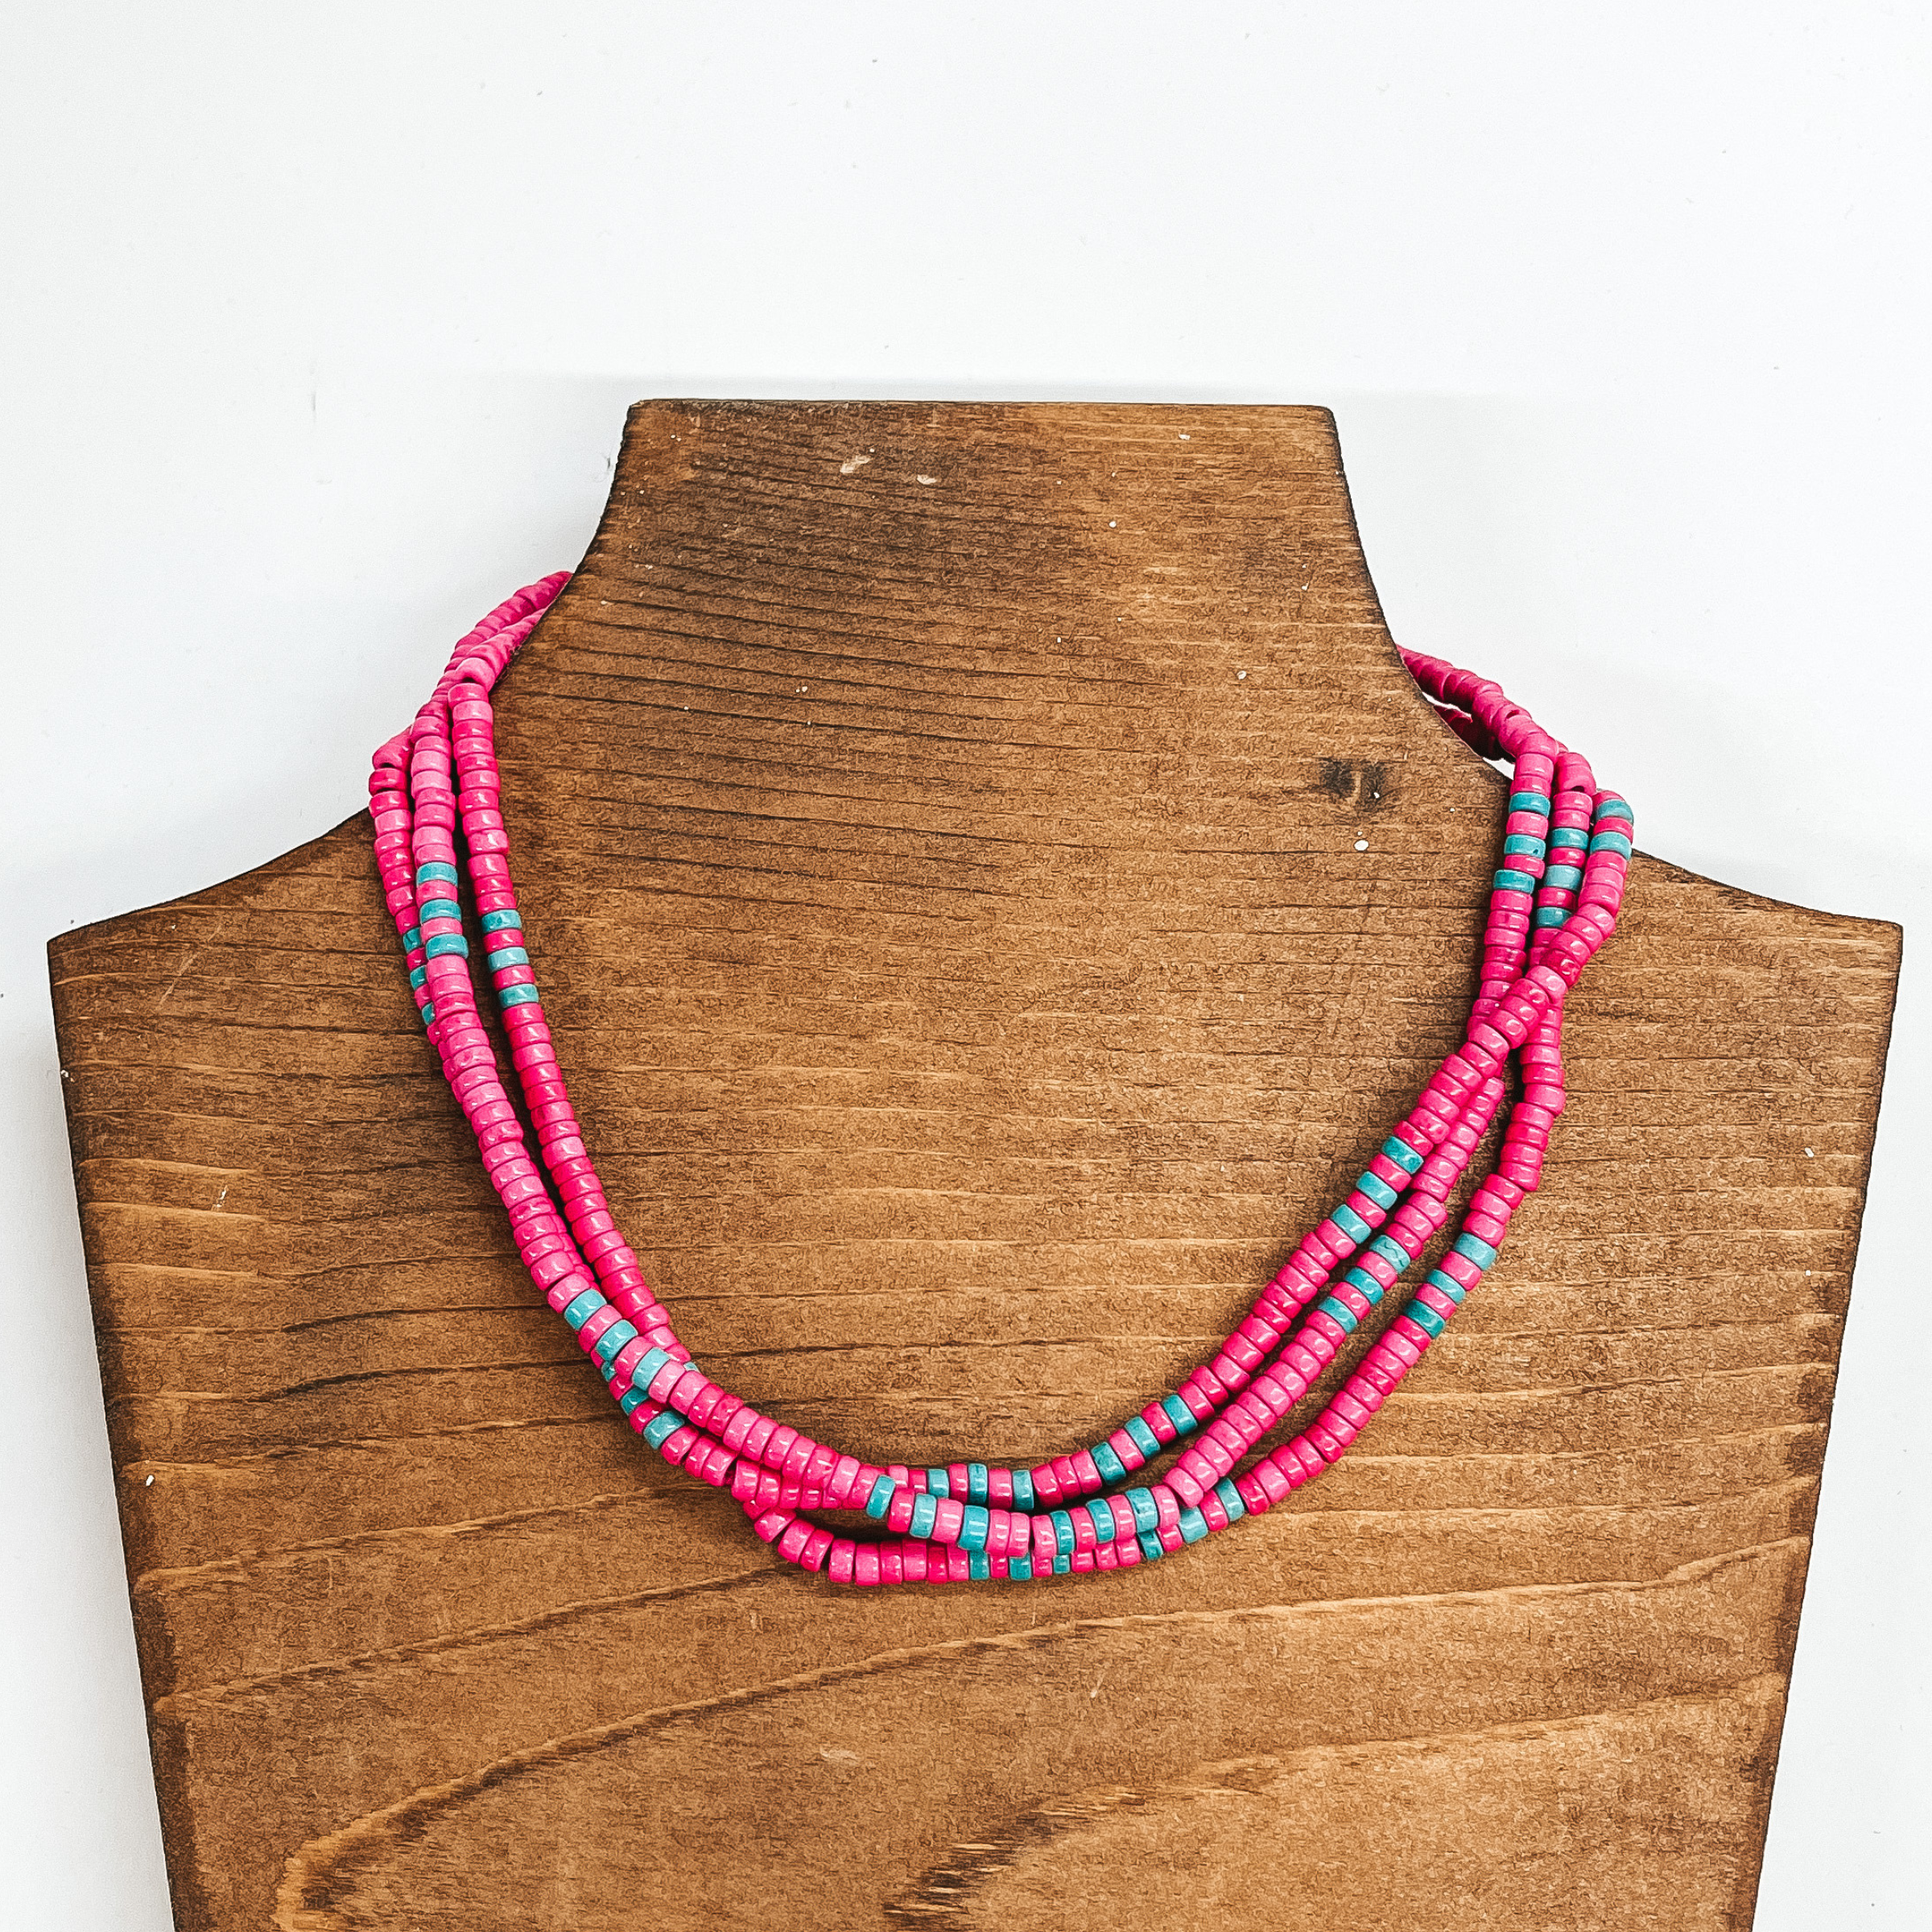 Trend Maker Three Strand Pink Beaded Choker Necklace with Turquoise Beads - Giddy Up Glamour Boutique